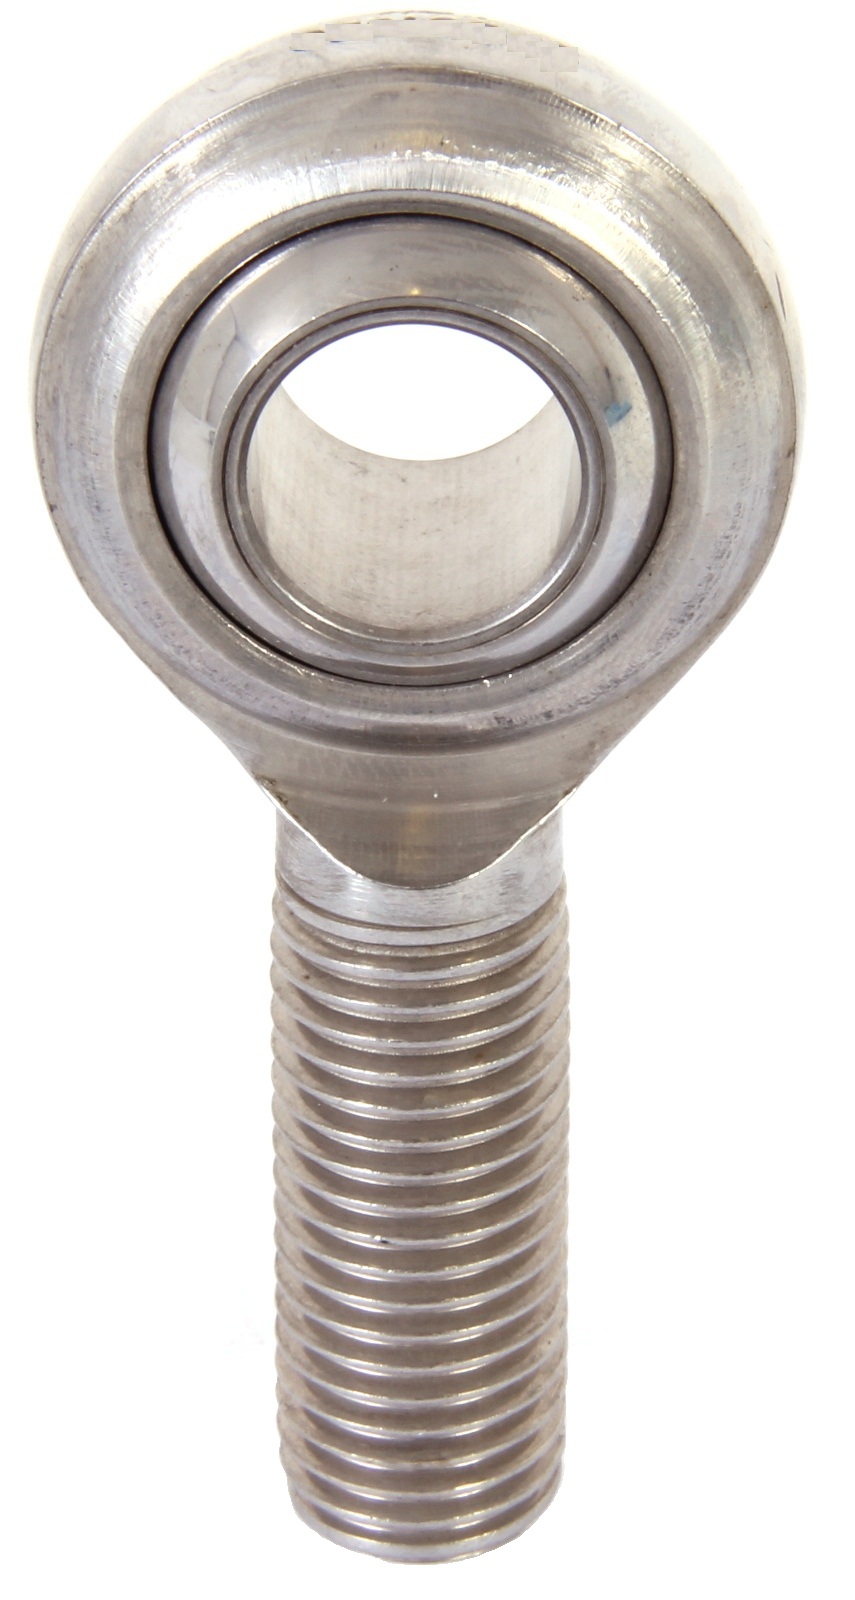 Male Stainless Steel Rod End - Maintenance Free